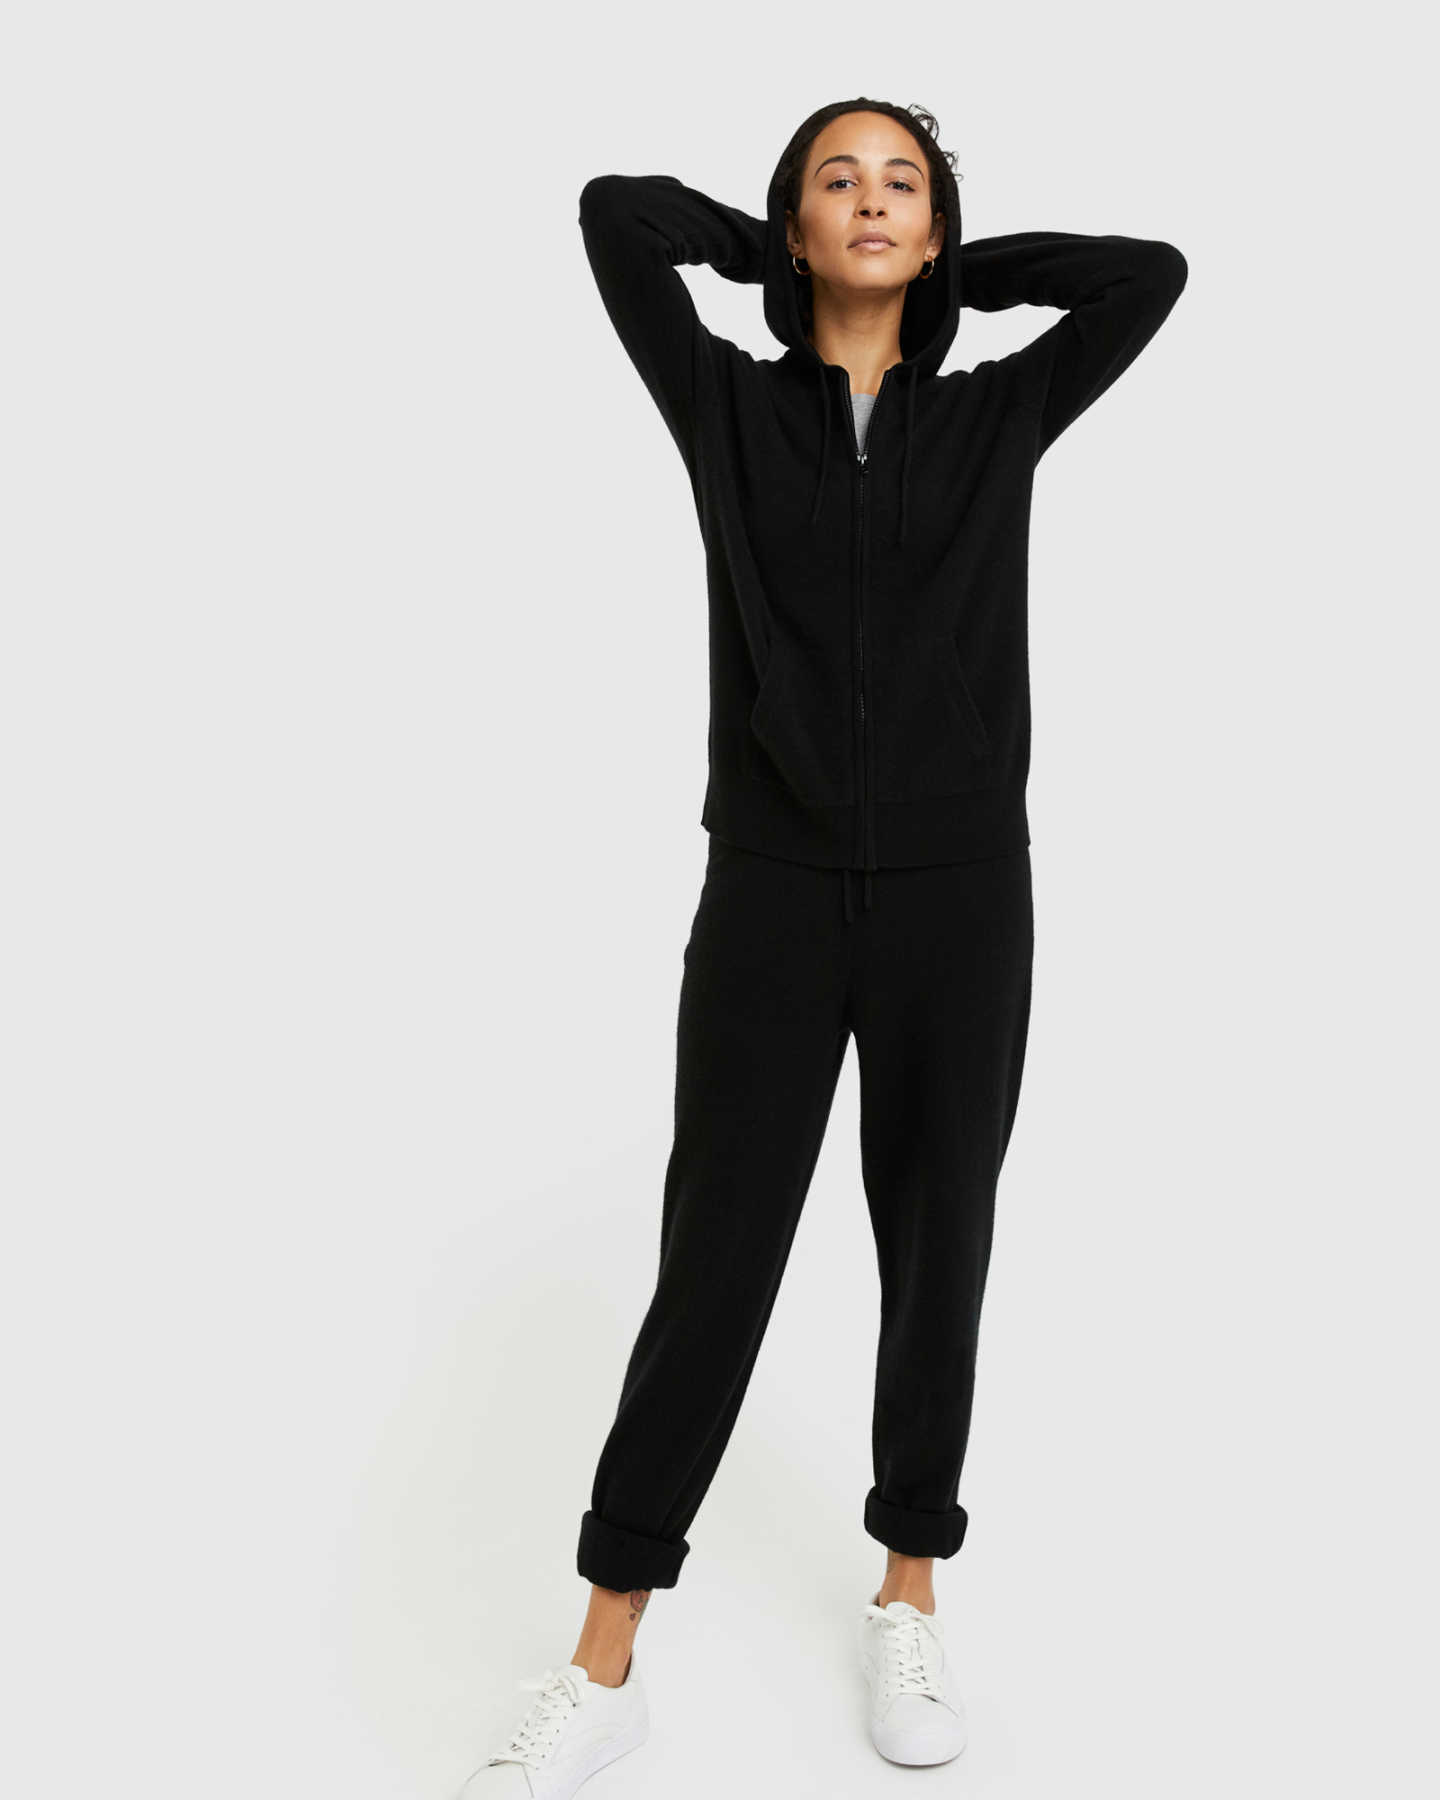 Woman wearing black cashmere zip hoodie and matching cashmere sweatpants